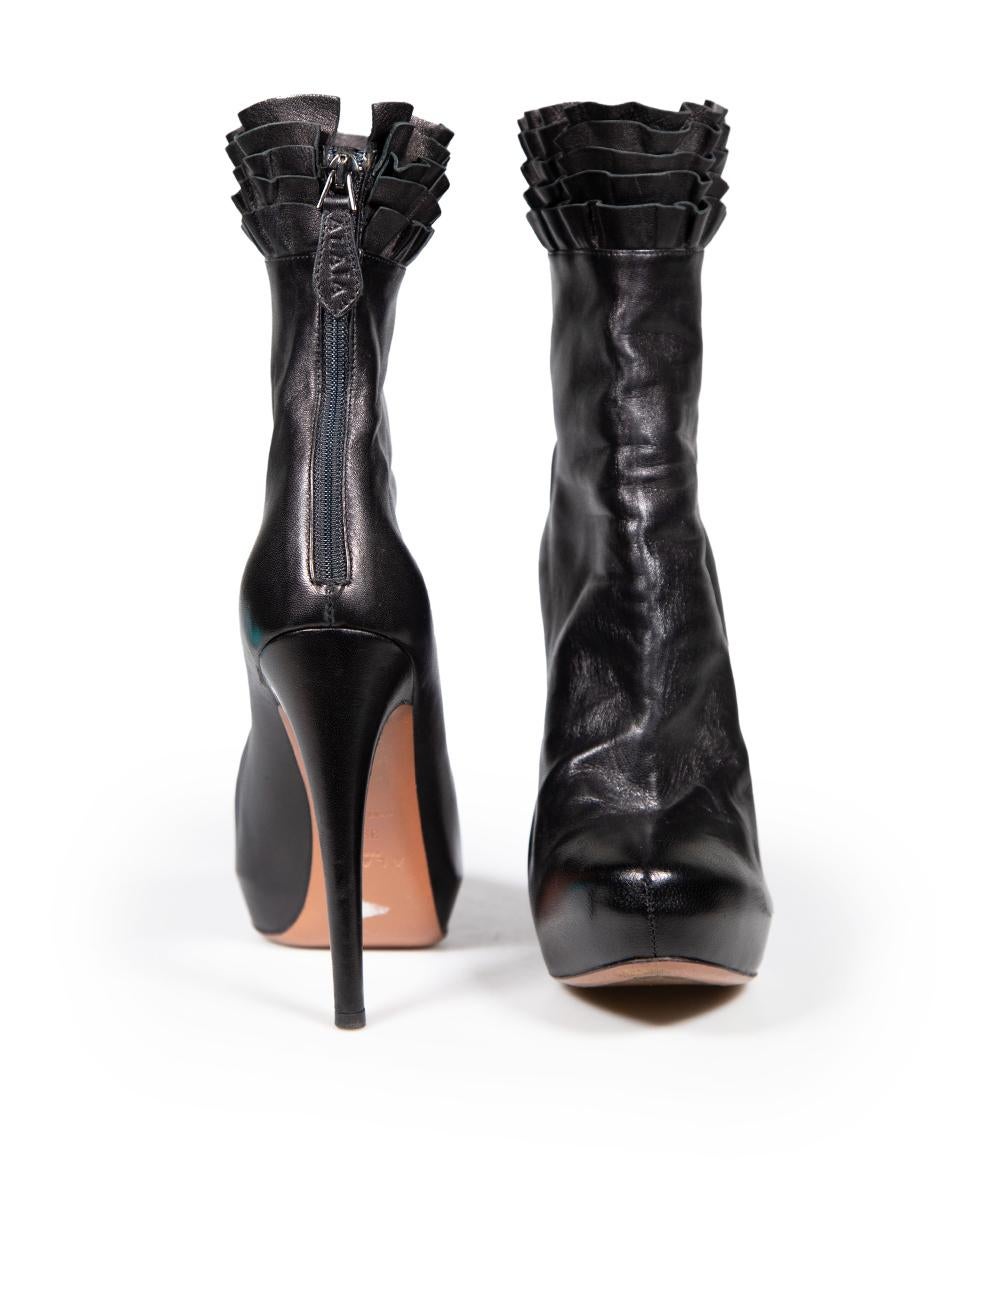 Alaïa Black Leather Ruffle Platform Boots Size IT 39.5 In Good Condition For Sale In London, GB